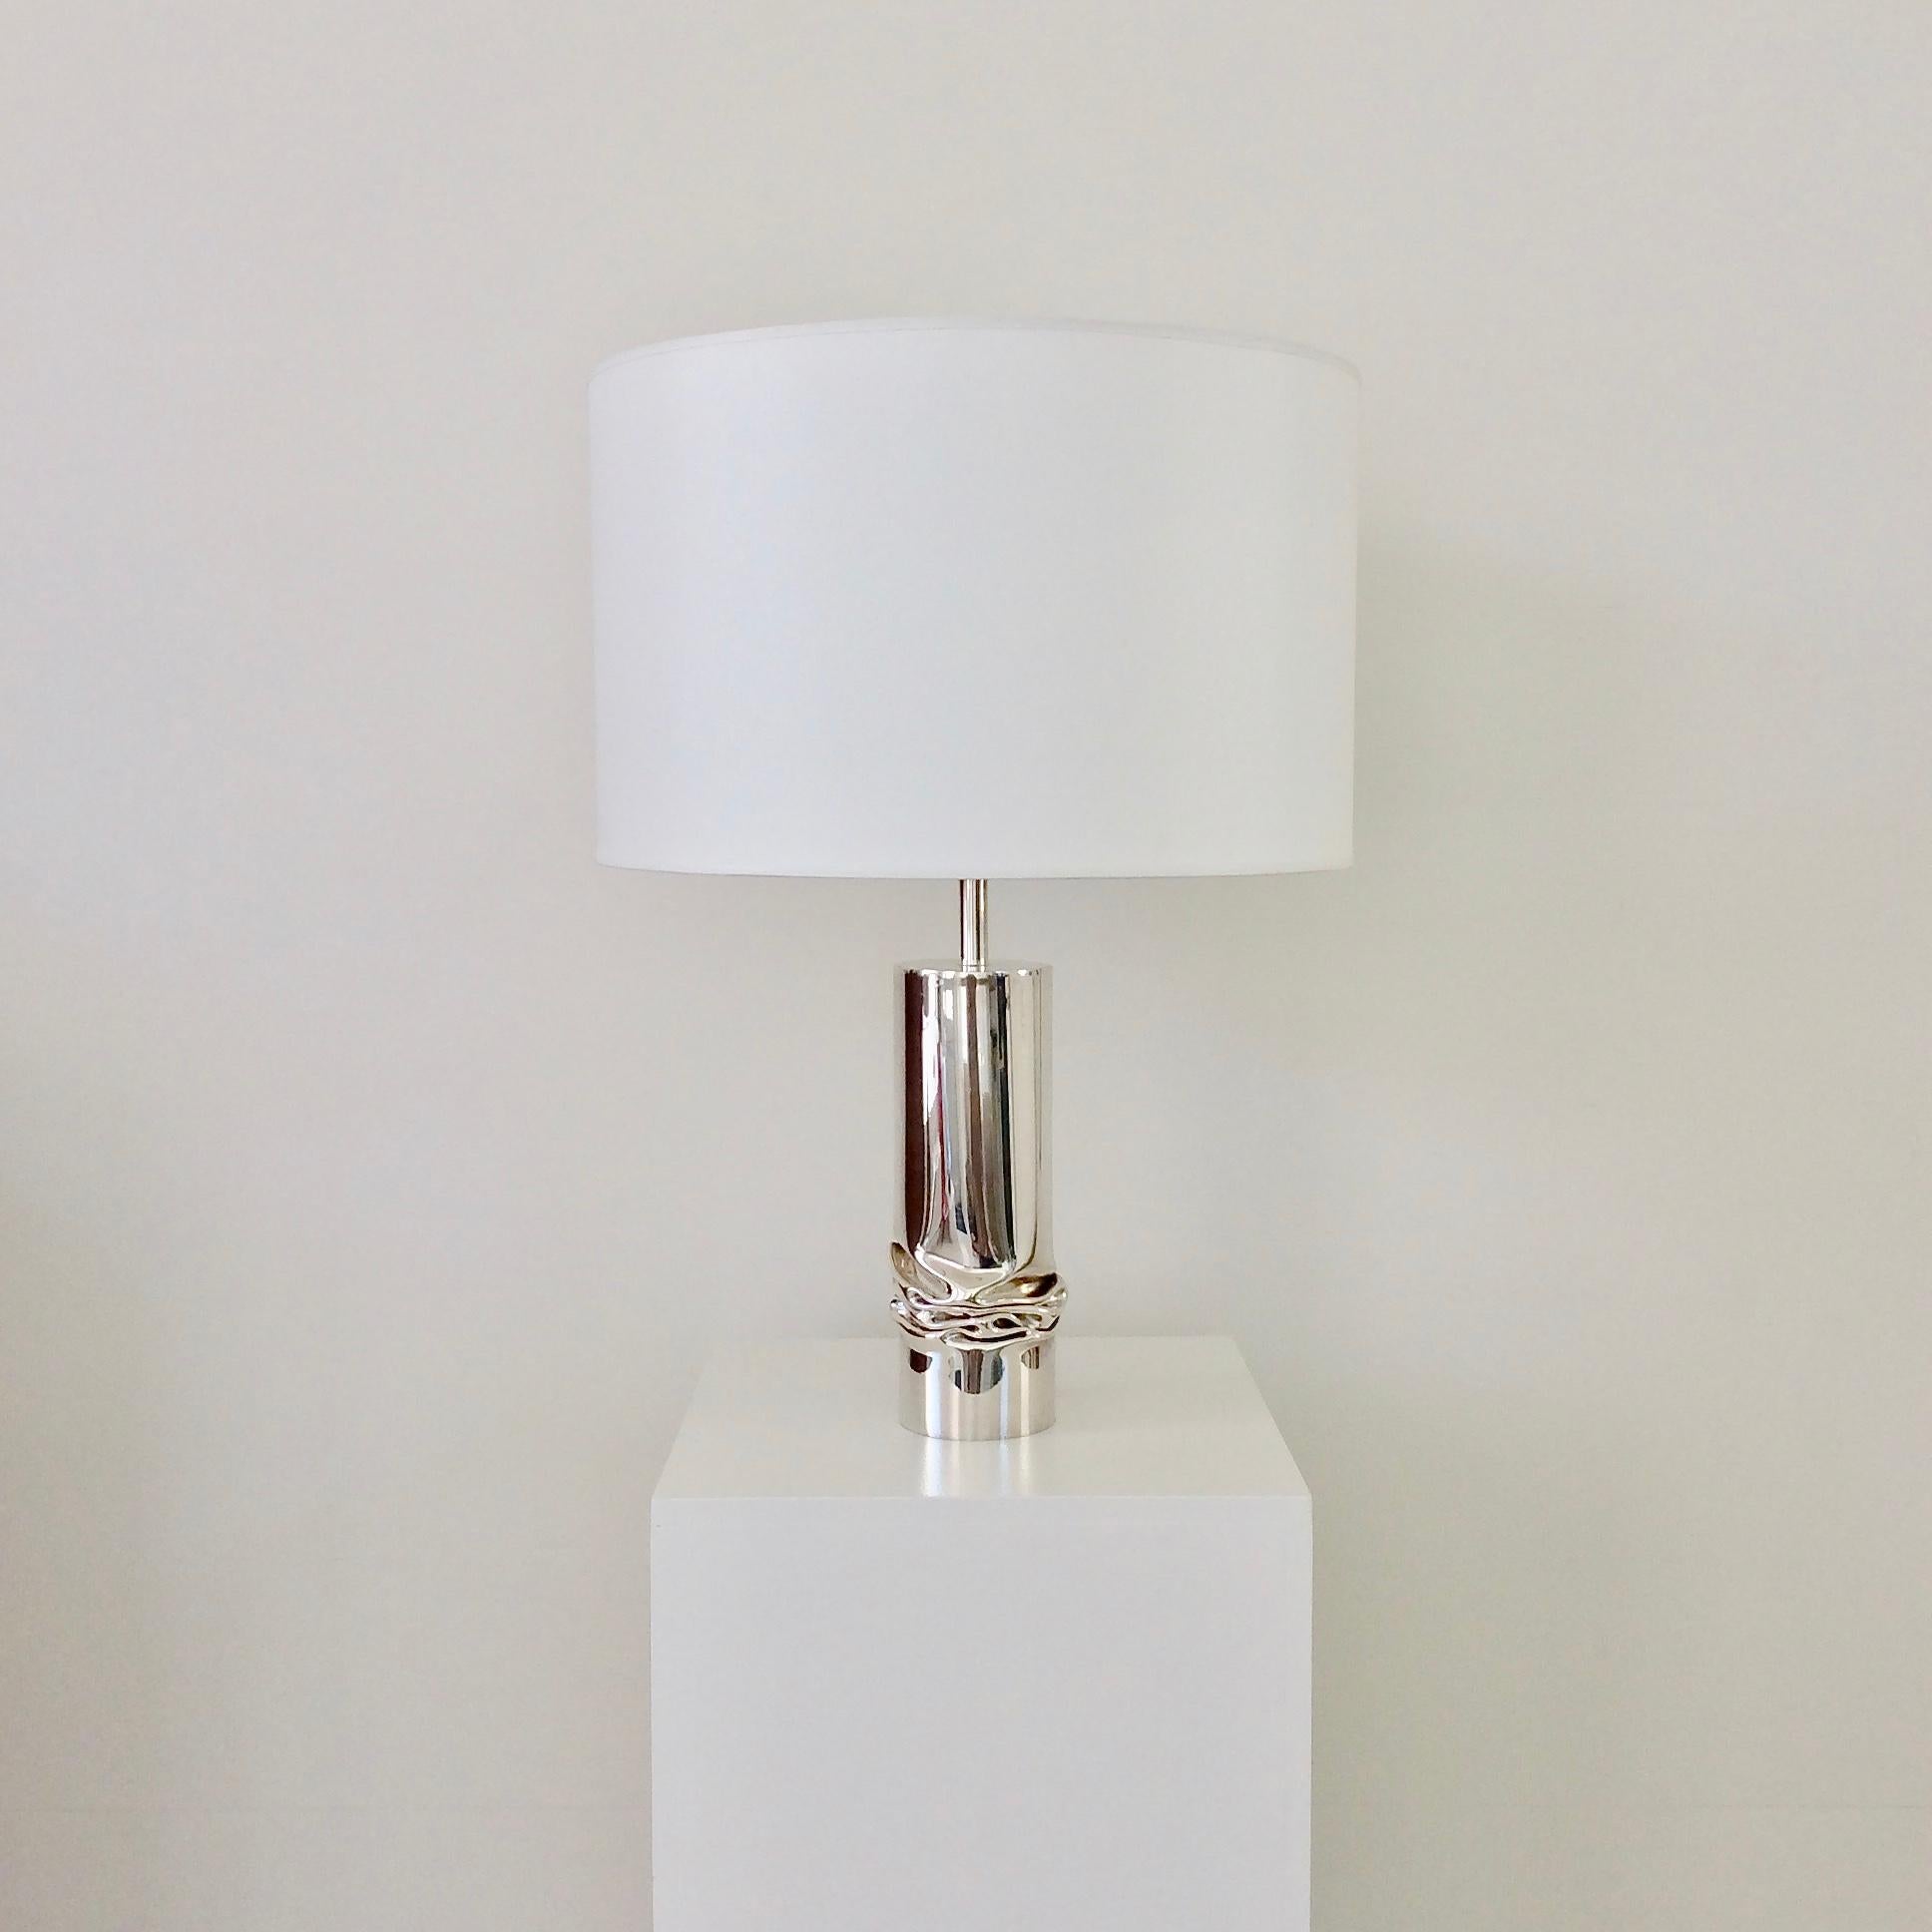 Jacques Moniquet Silver Plated Table Lamp, Cheret Edition, circa 1975, France For Sale 3